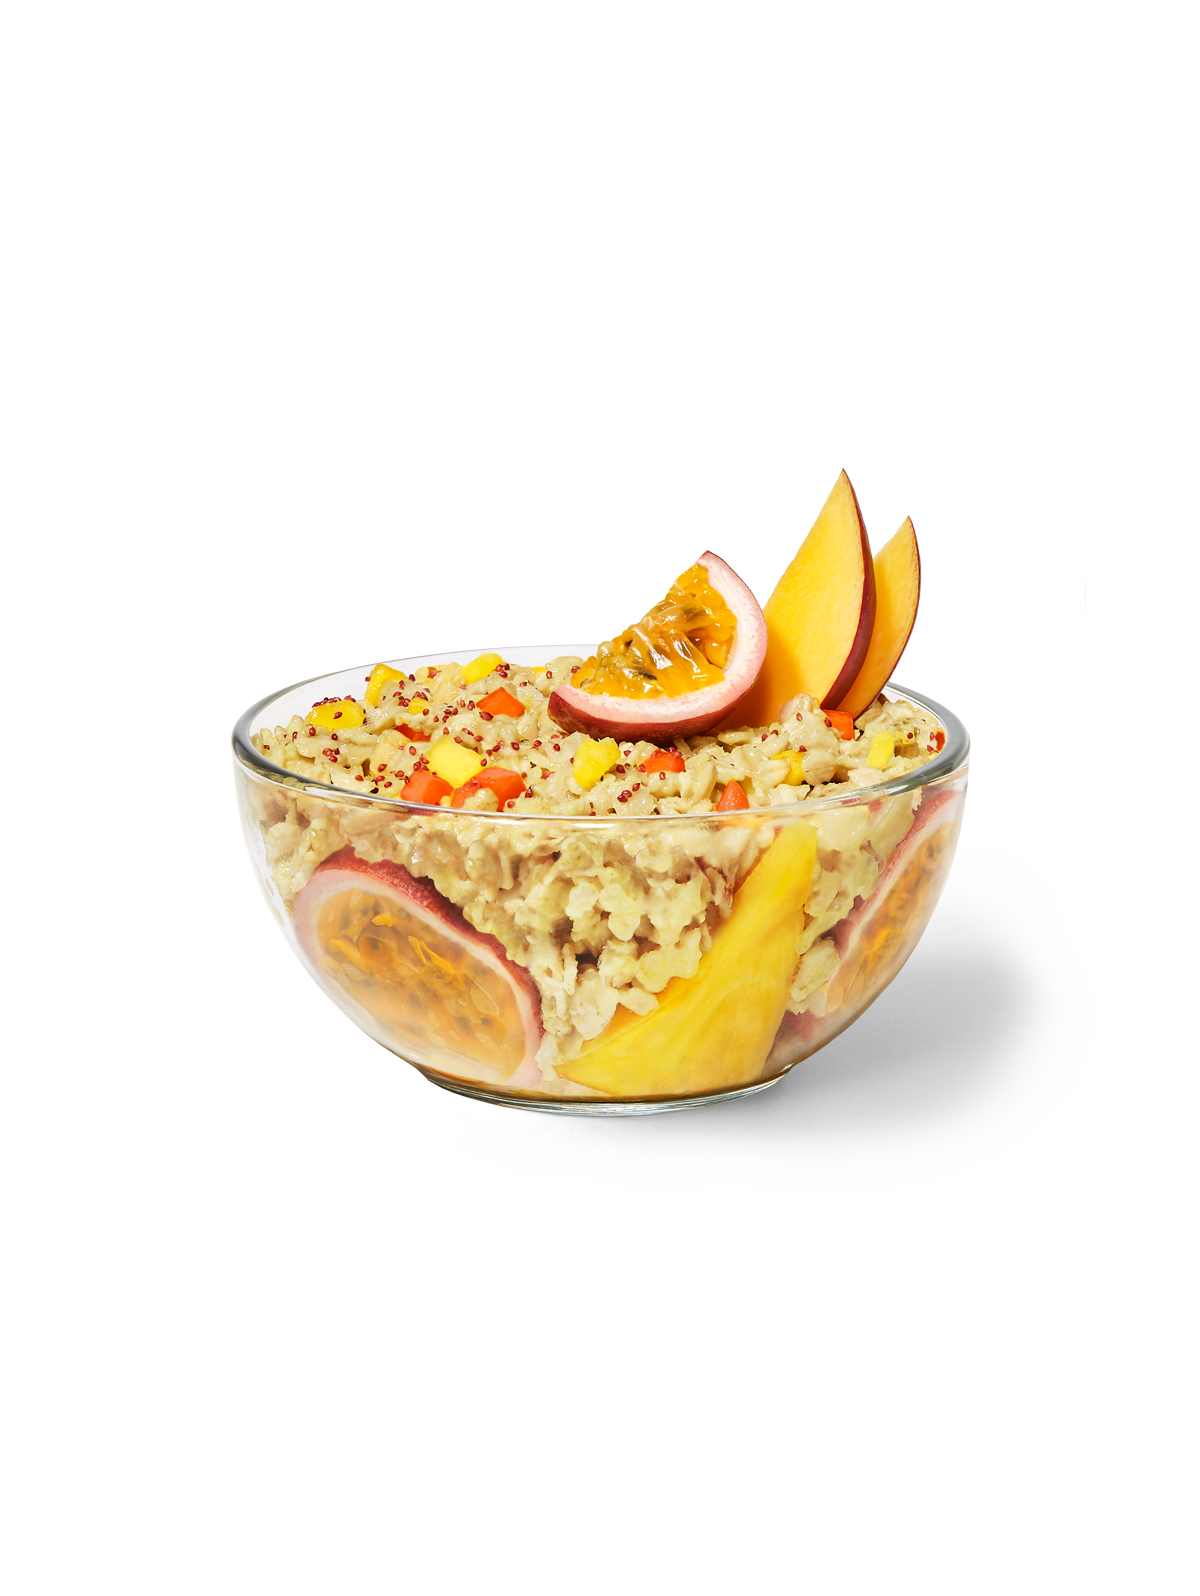 Pineapple + Passionfruit - Easy Tropical Oat Bowl